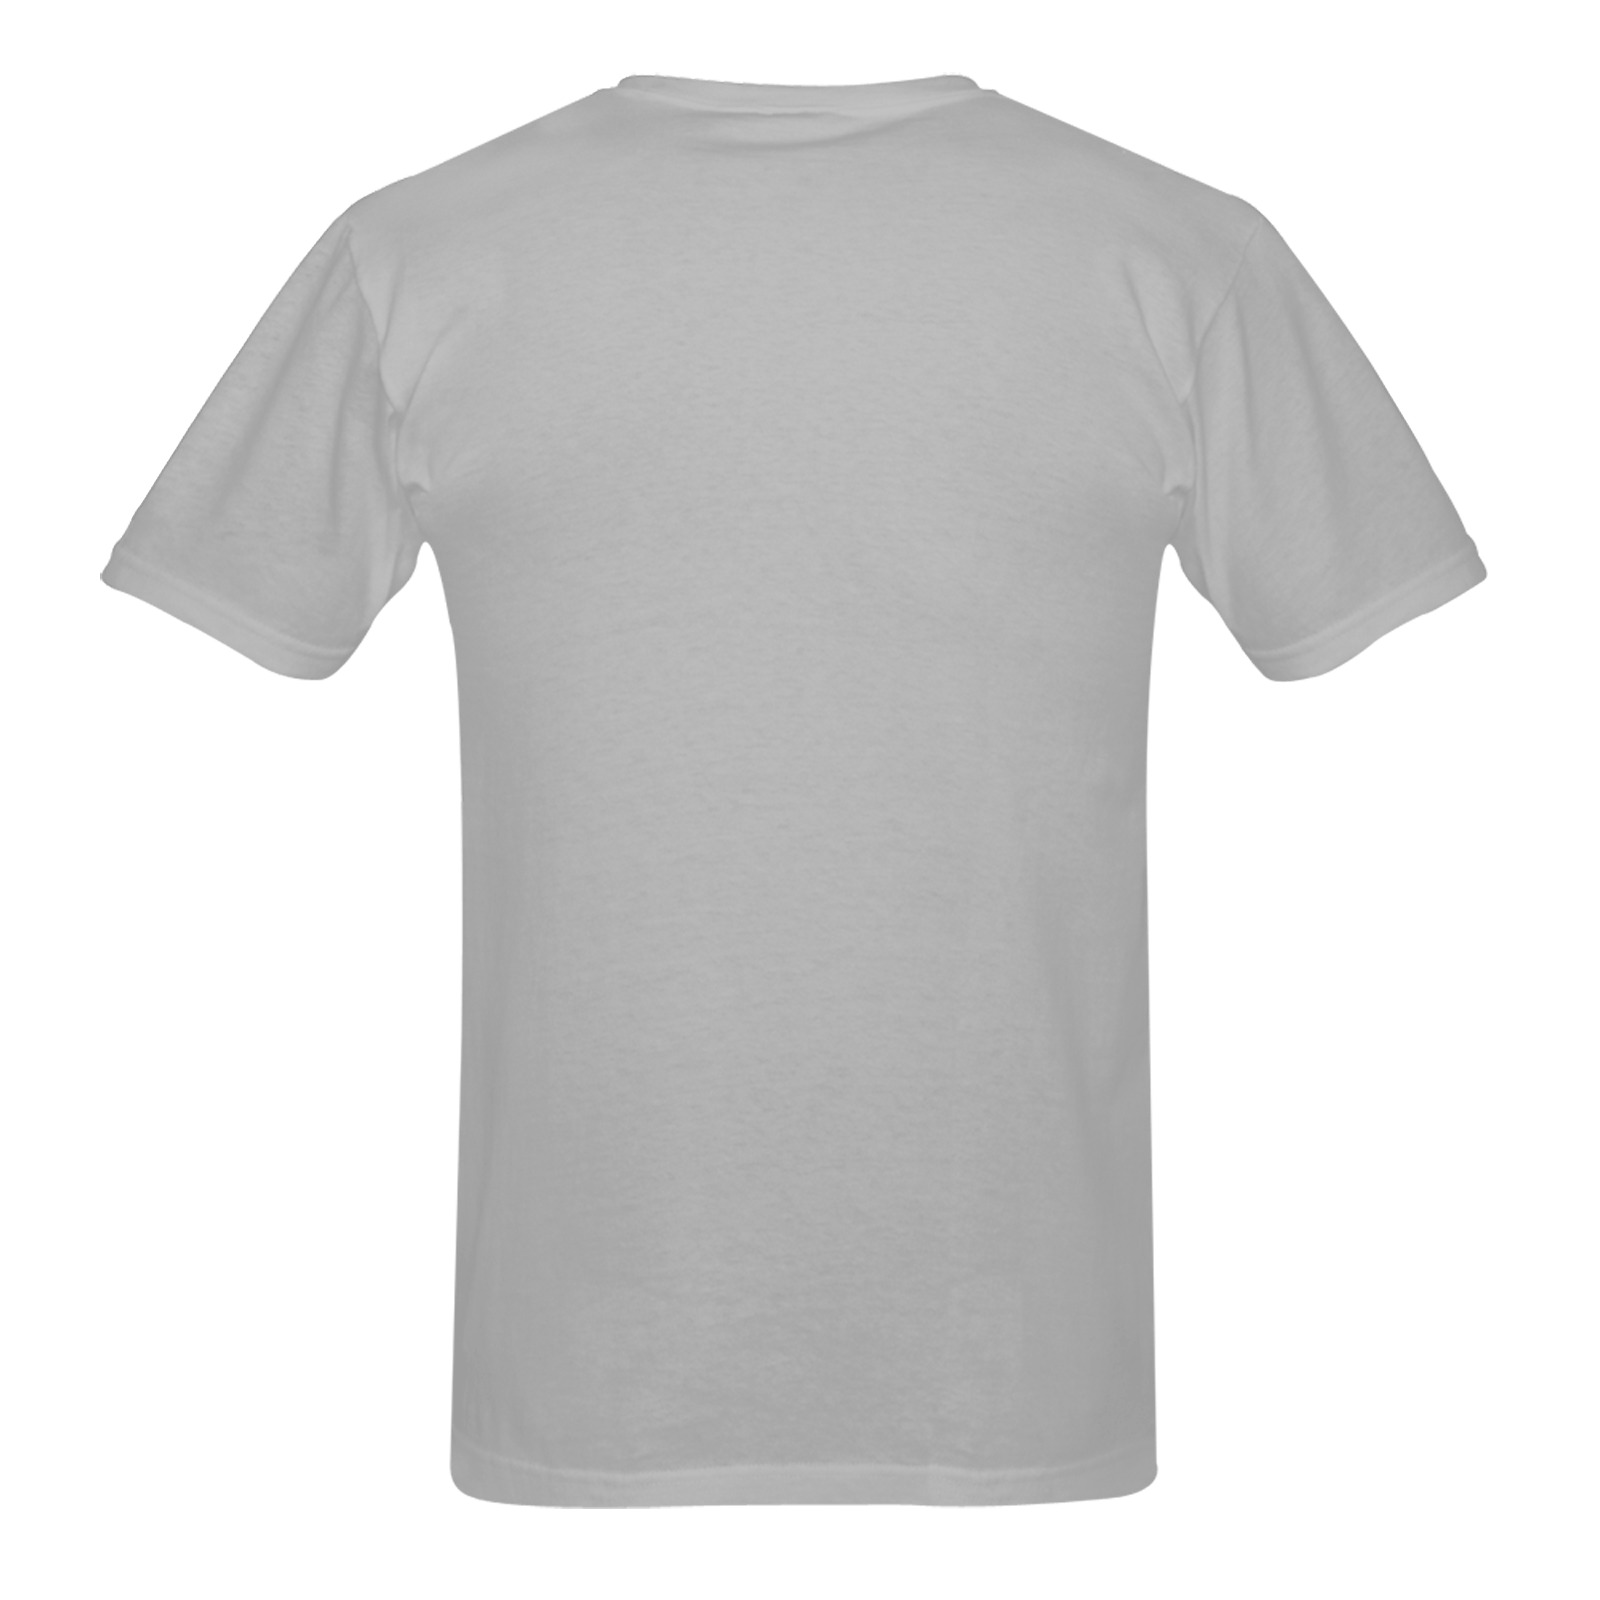 Grey - Men's Heavy Cotton T-Shirt (One Side Printing)